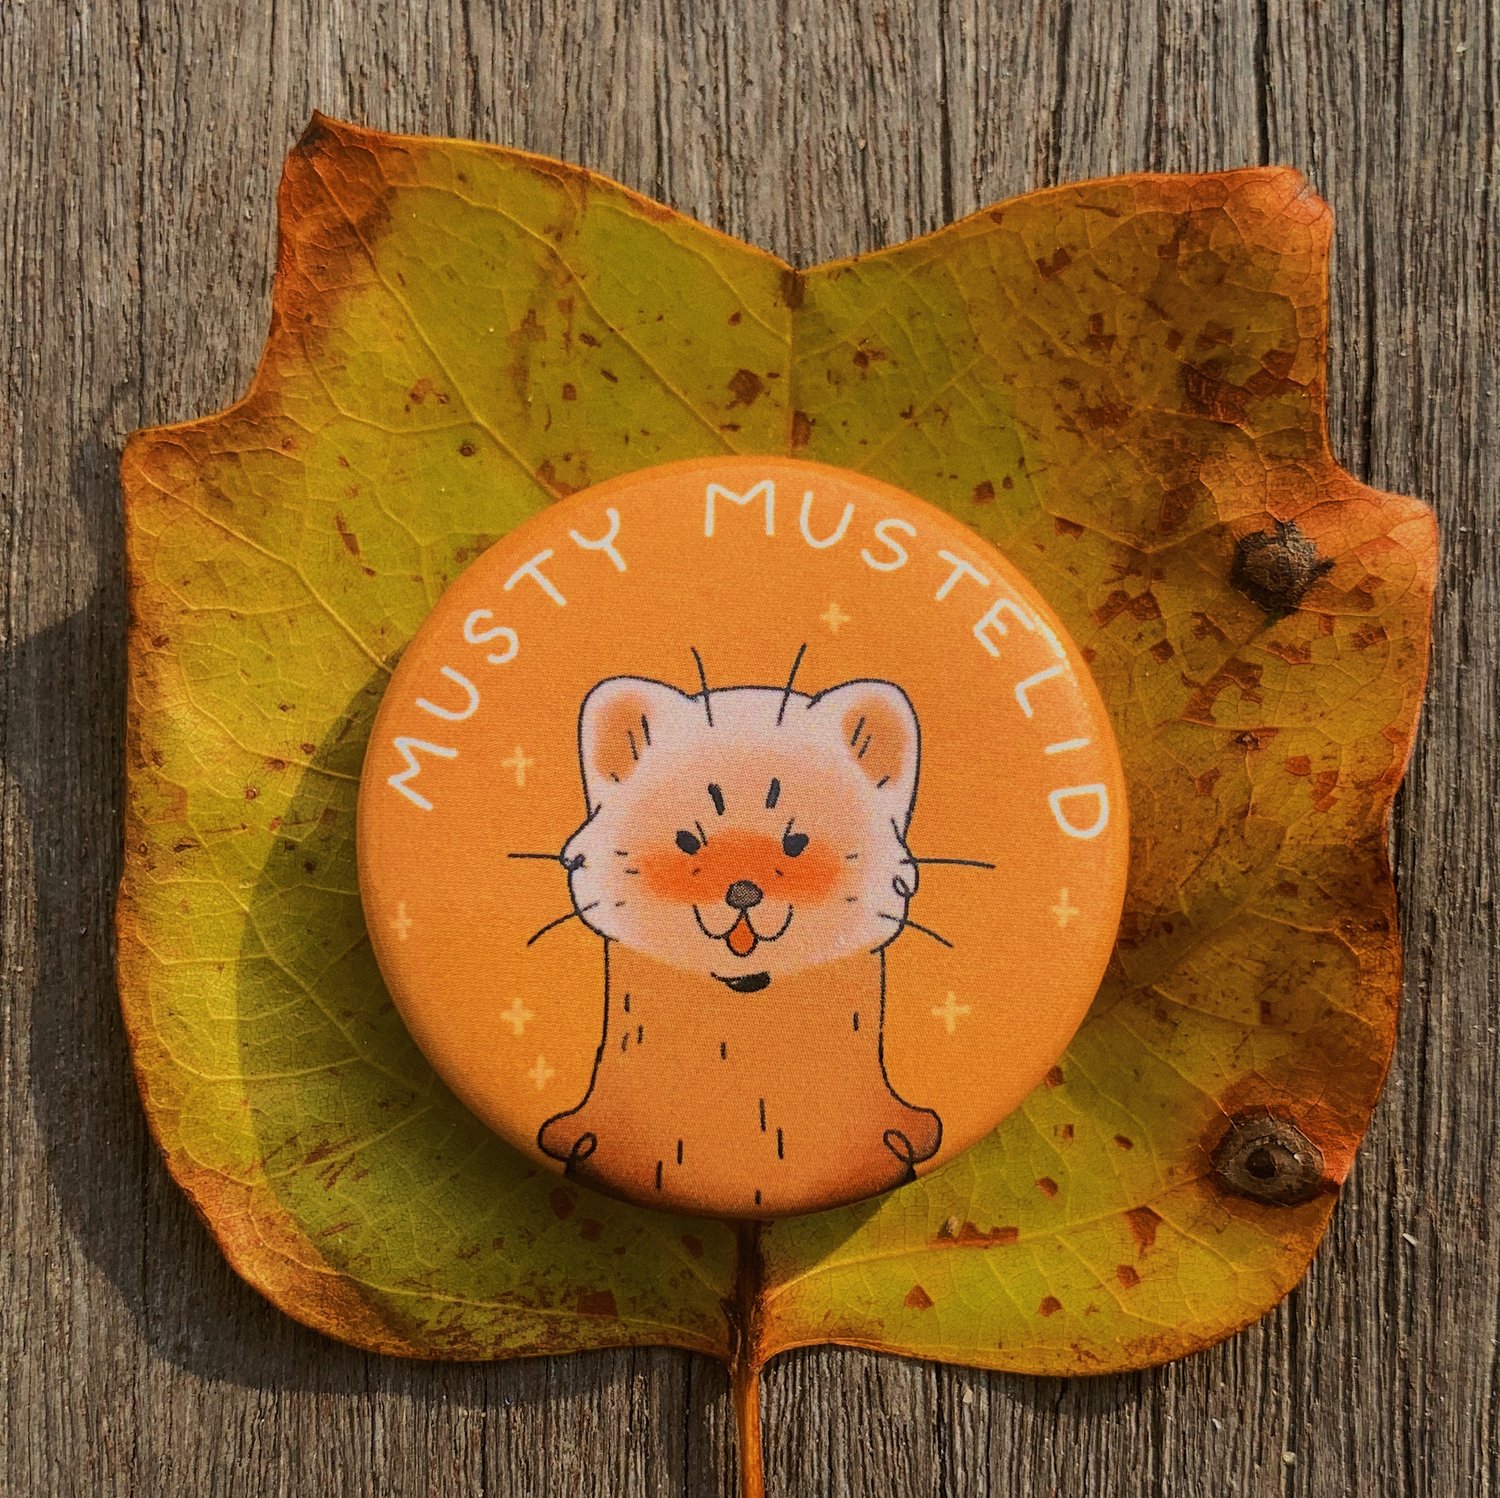 musty mustelid button